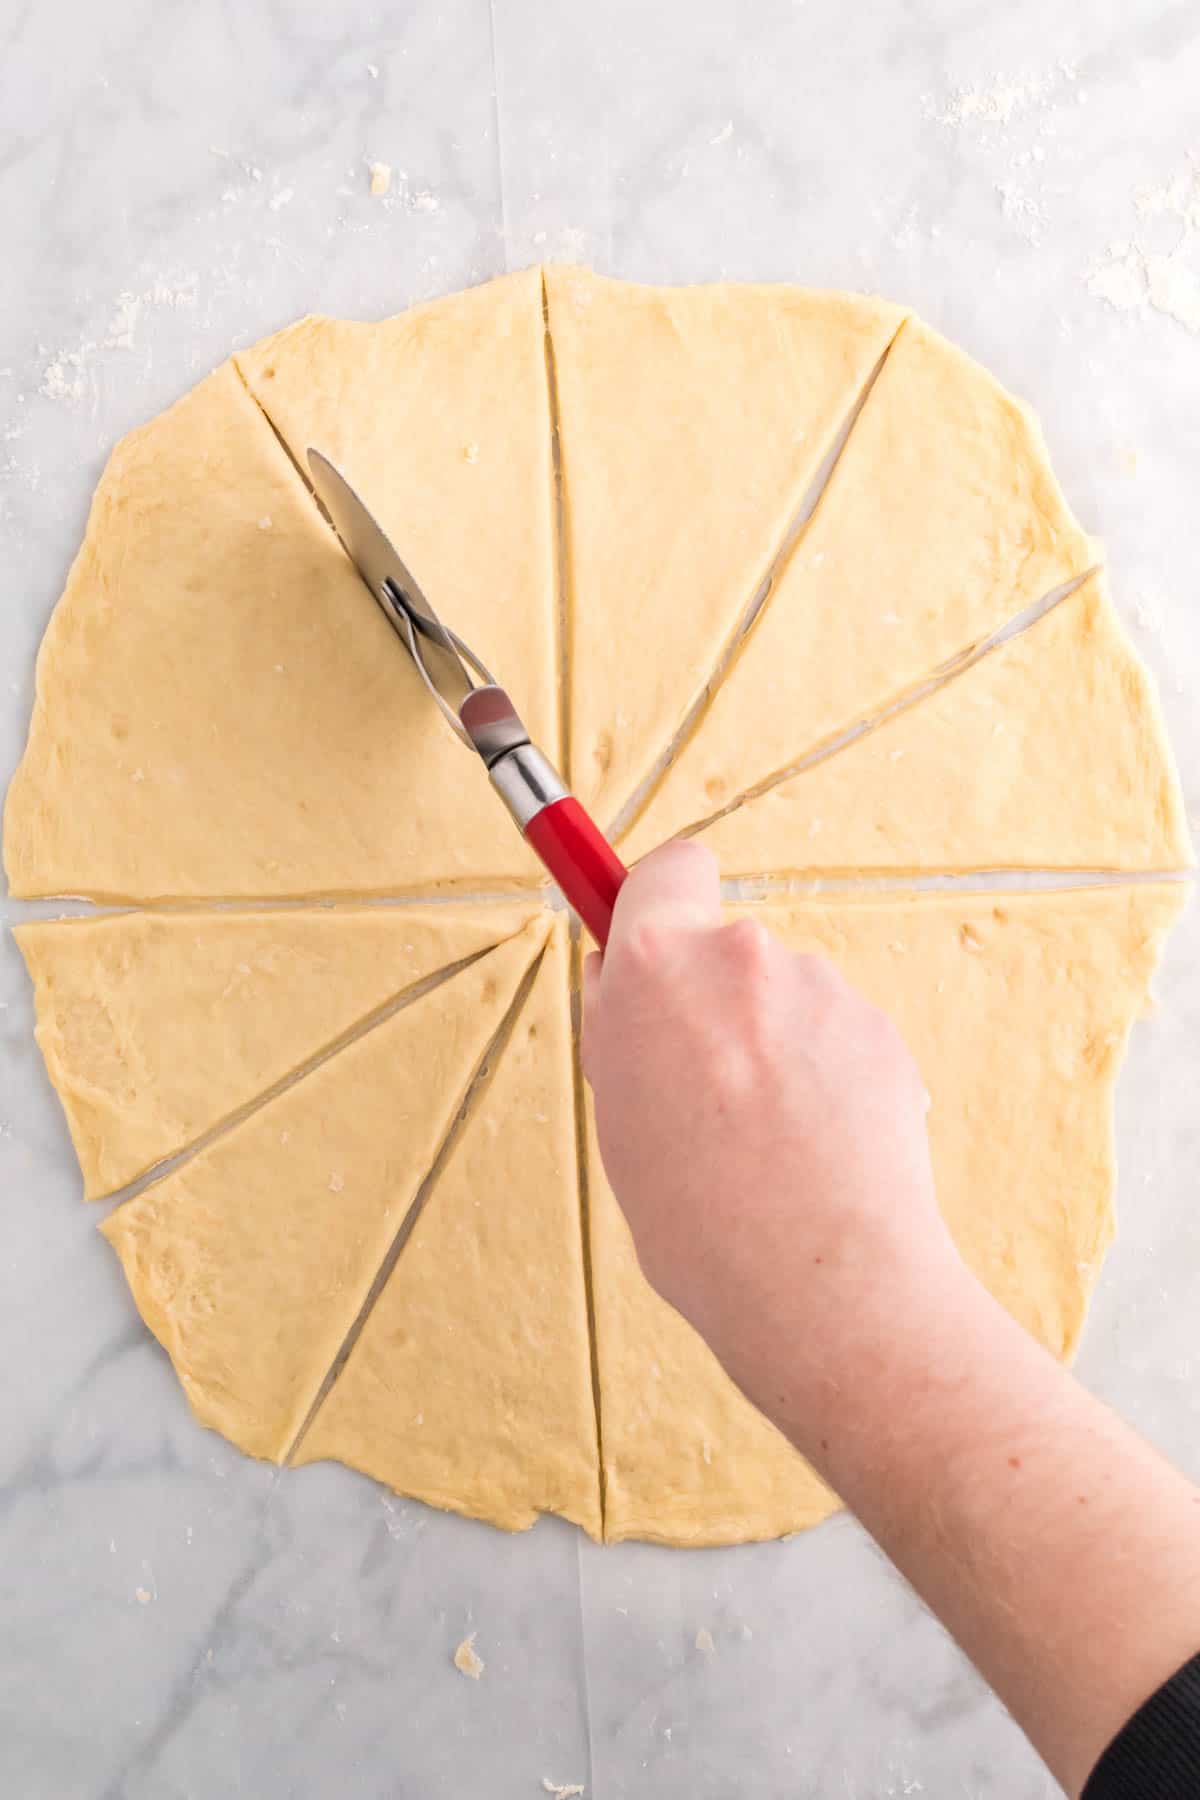 Top view of rolled out dough being cur into triangle segments wth apizza cutter. 